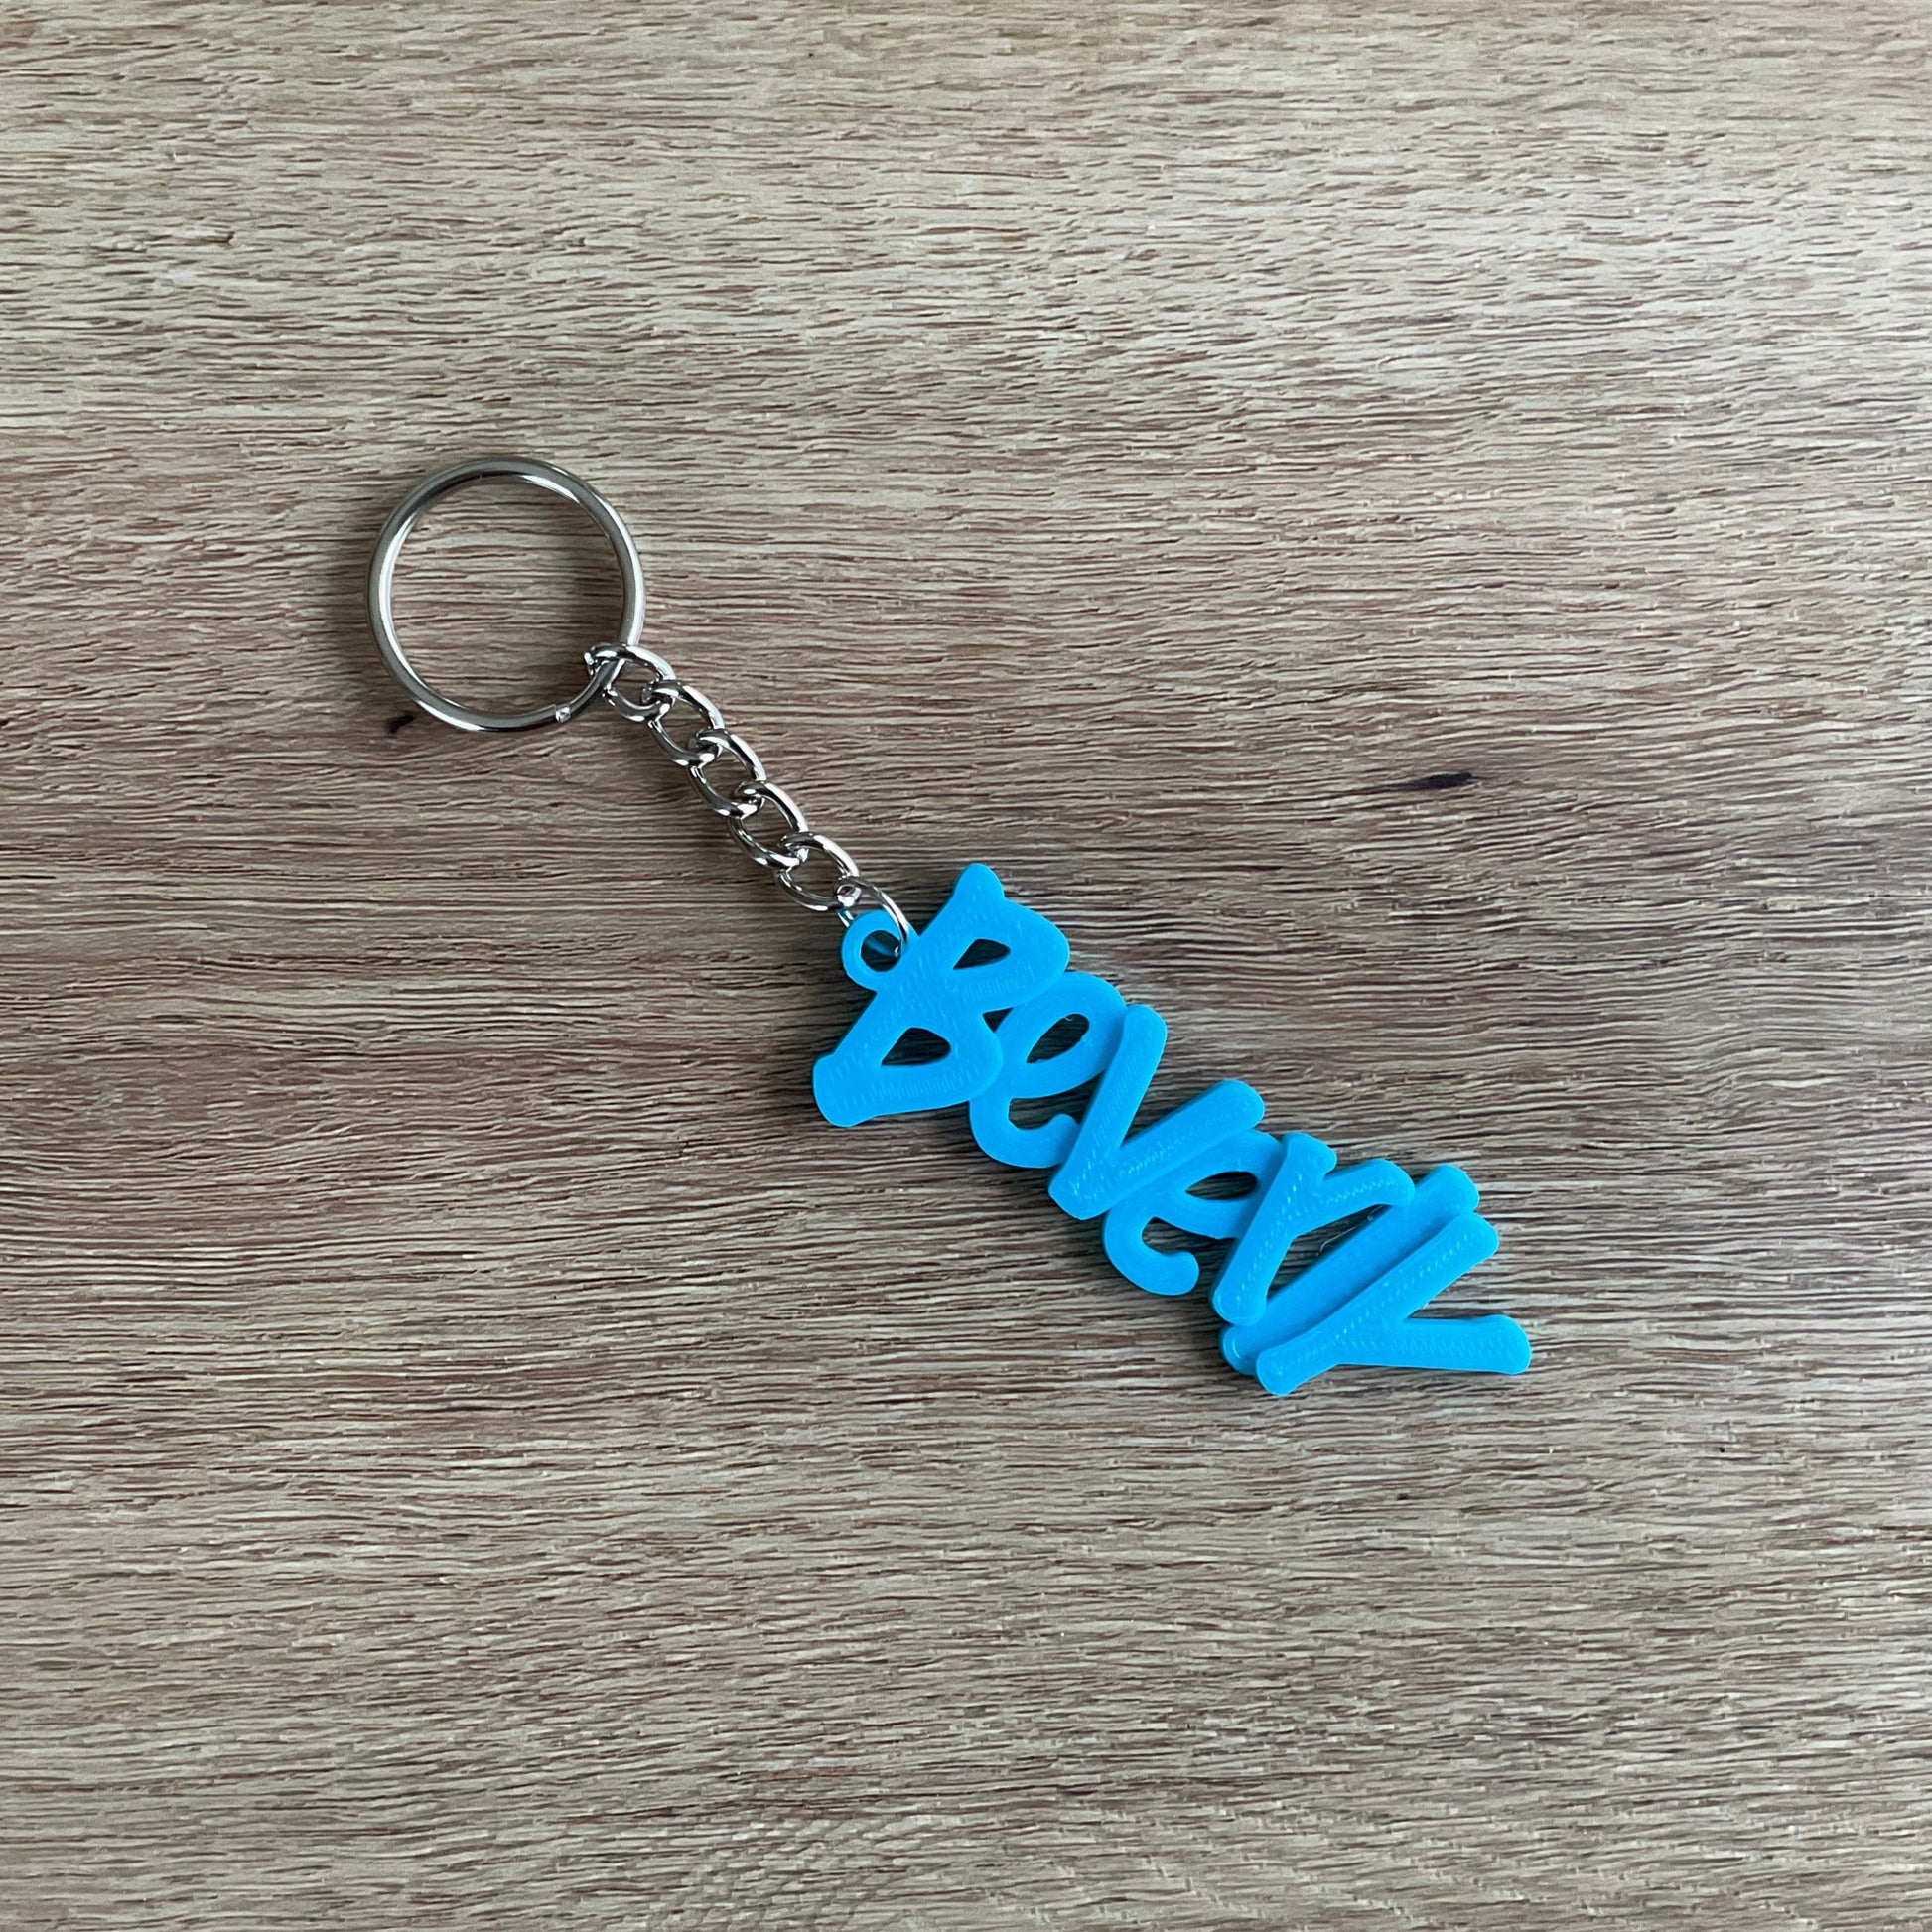 An sample of the blue keychain